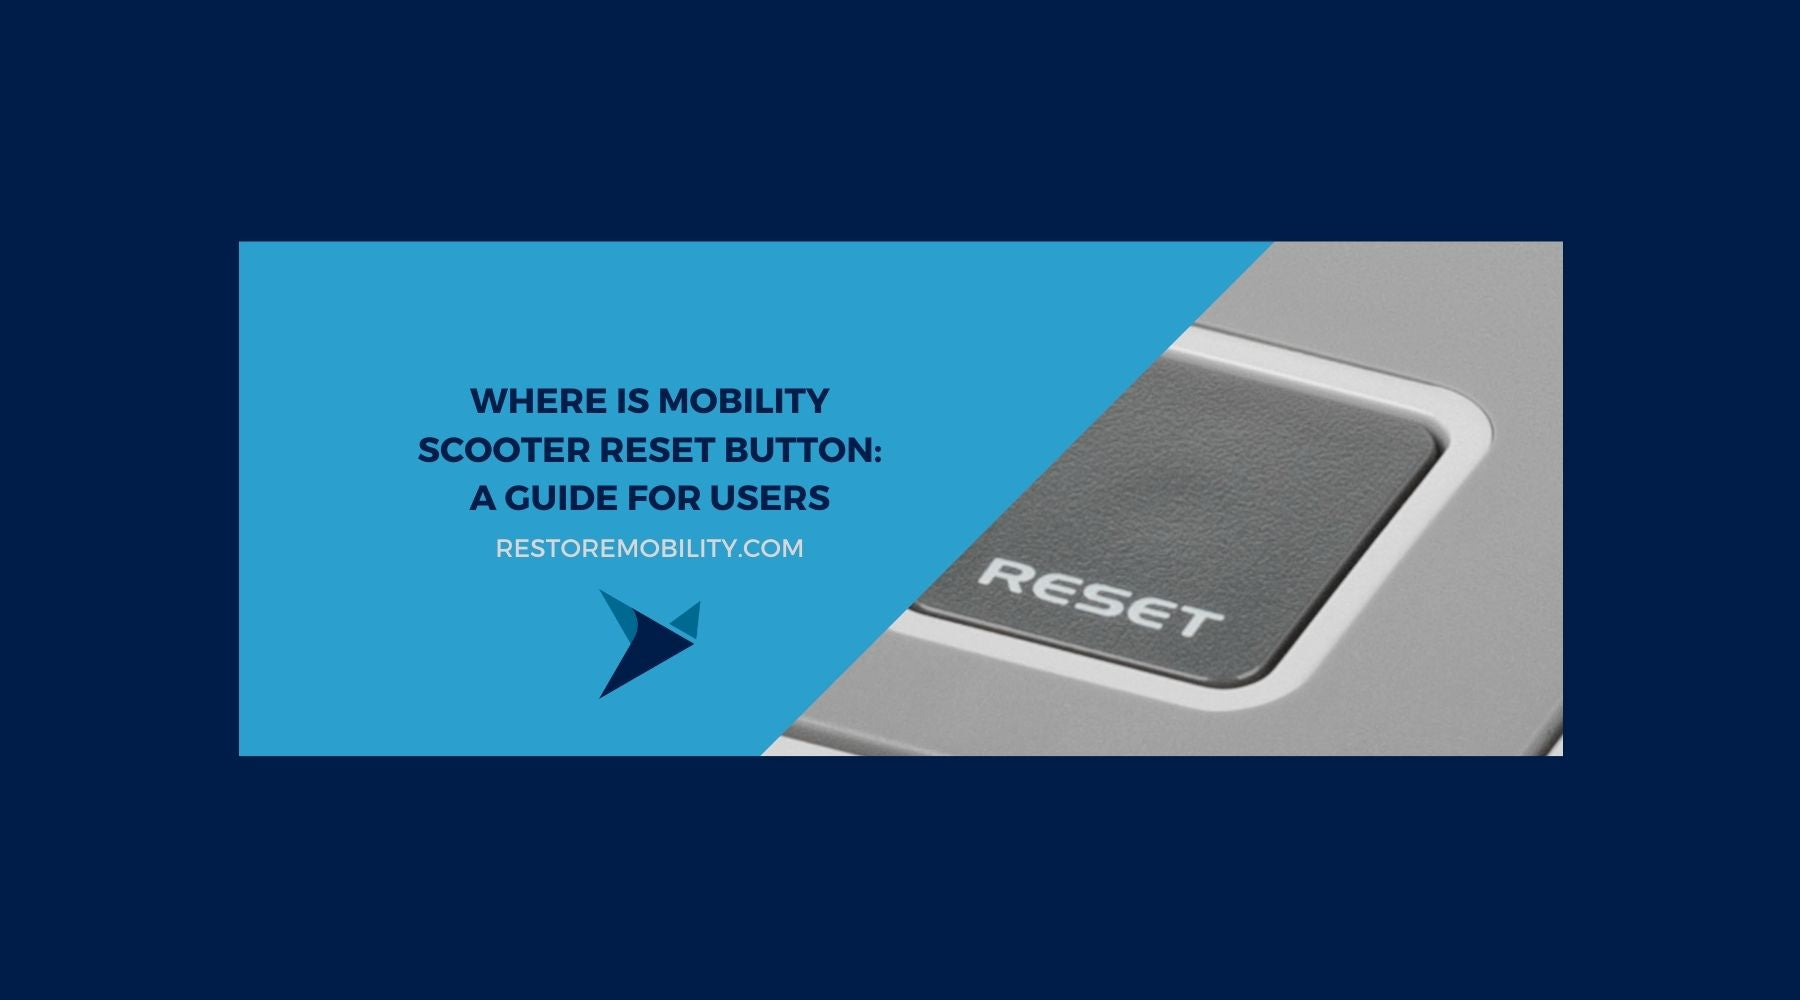 Where Is Mobility Scooter Reset Button: A Guide for Users